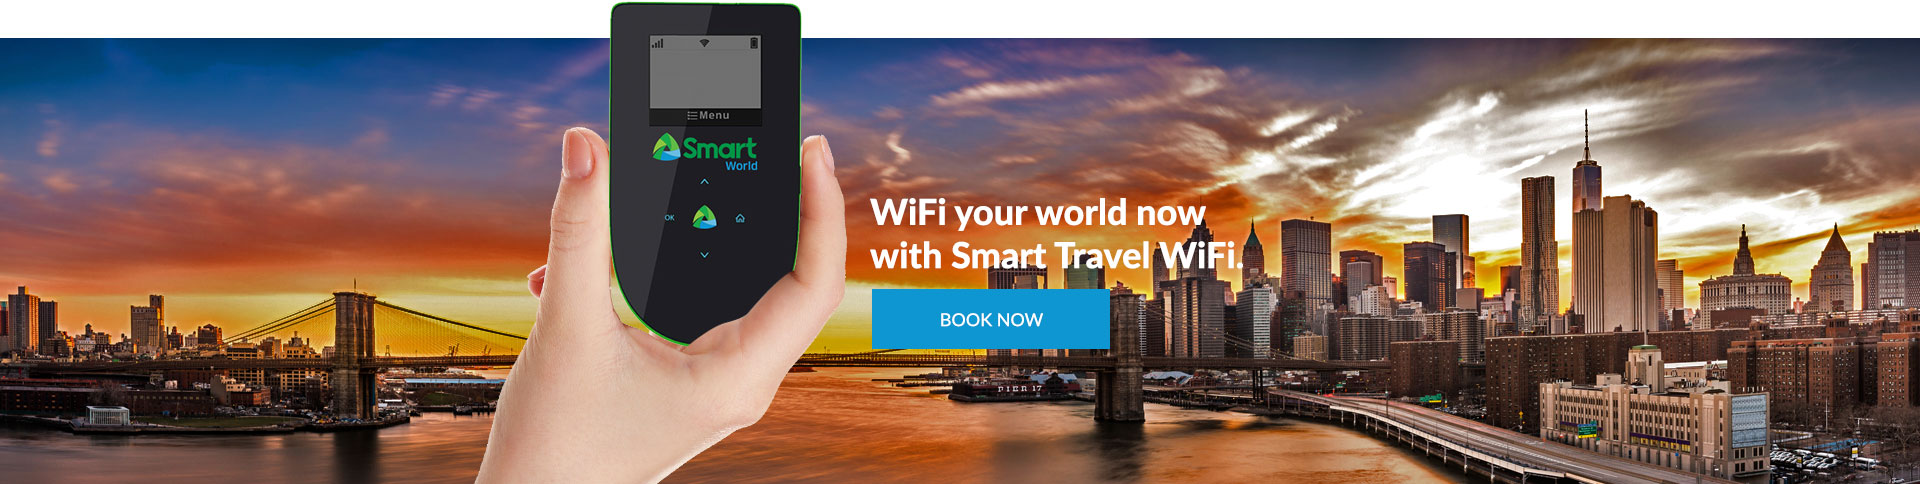 smart-pages-surfabroad-booknow